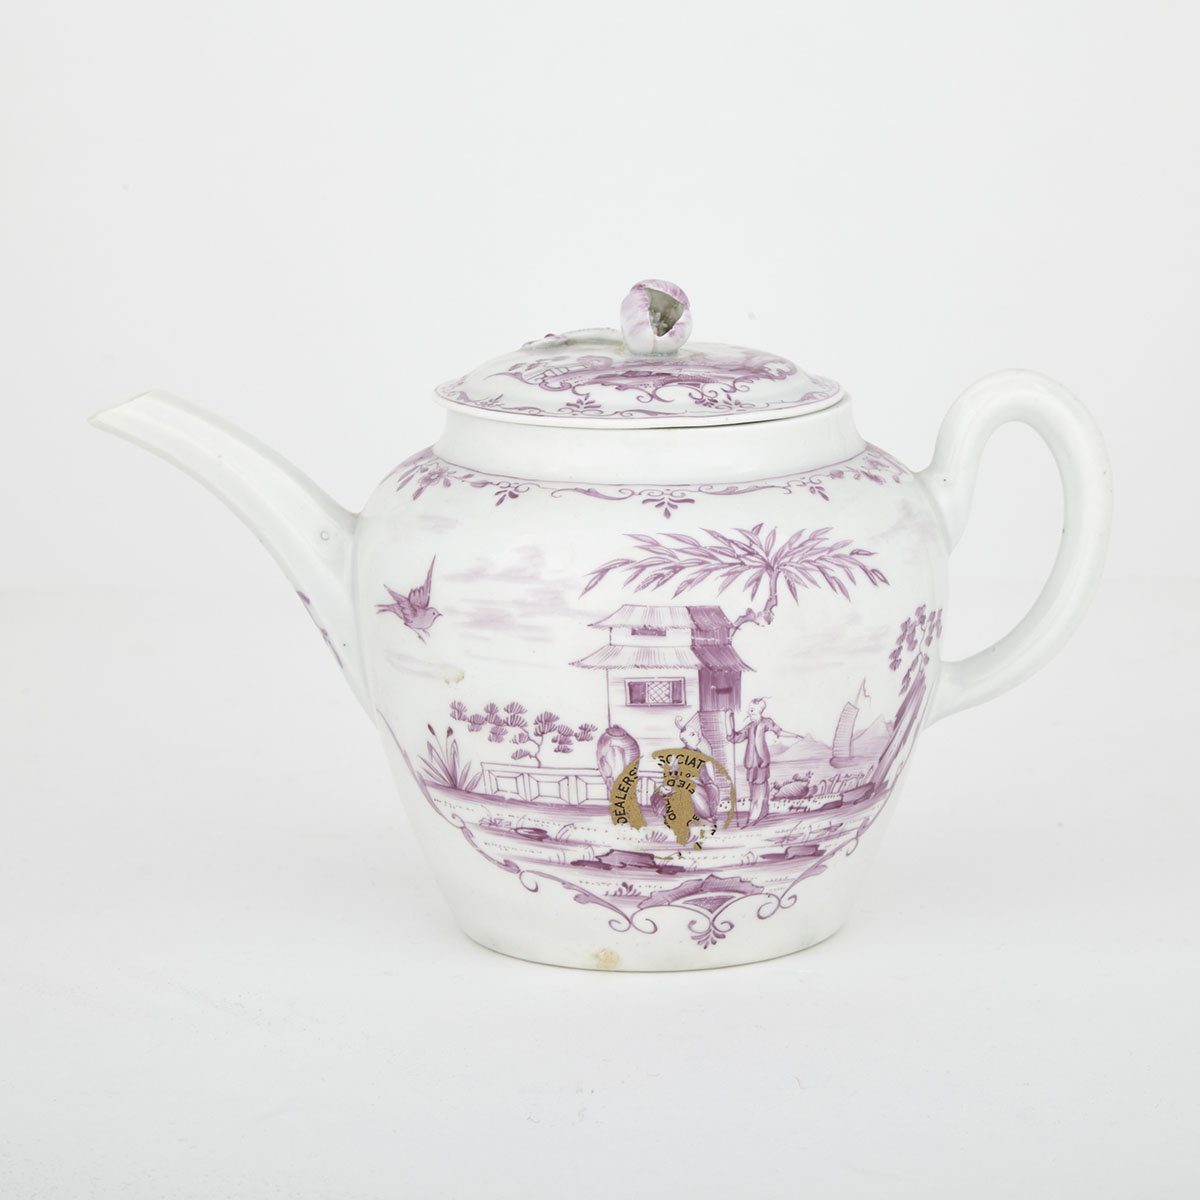 Worcester Puce-Decorated Teapot, c.1770